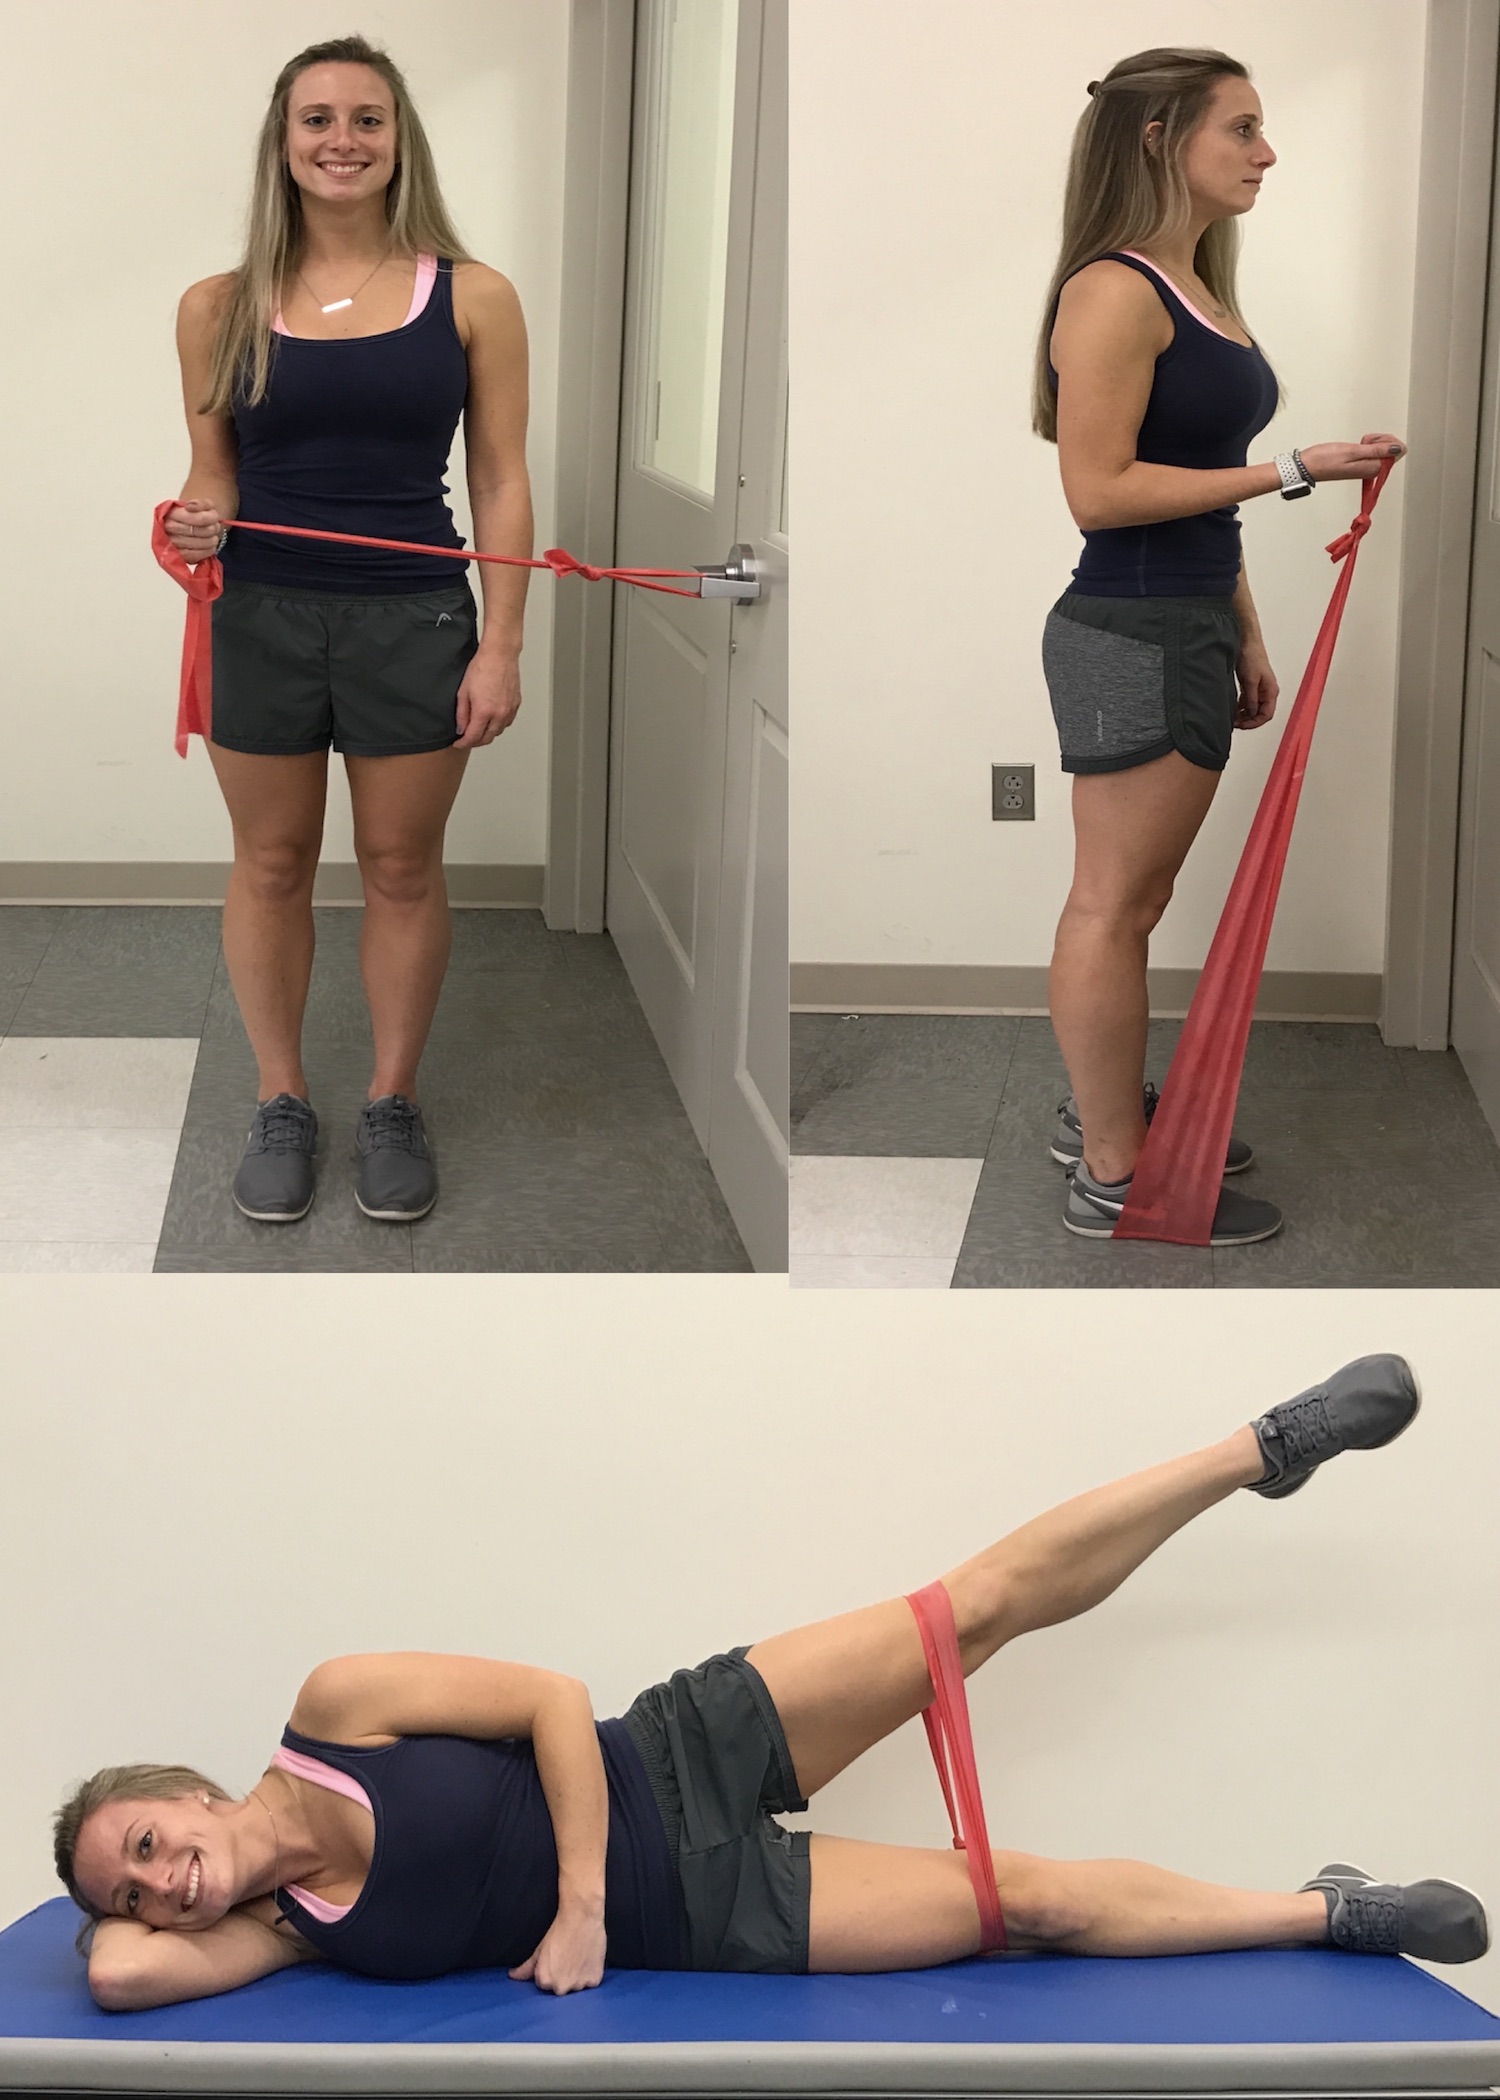 Bicep Curl- Shoulder Press- Tricep Extension by Chan Y. - Exercise